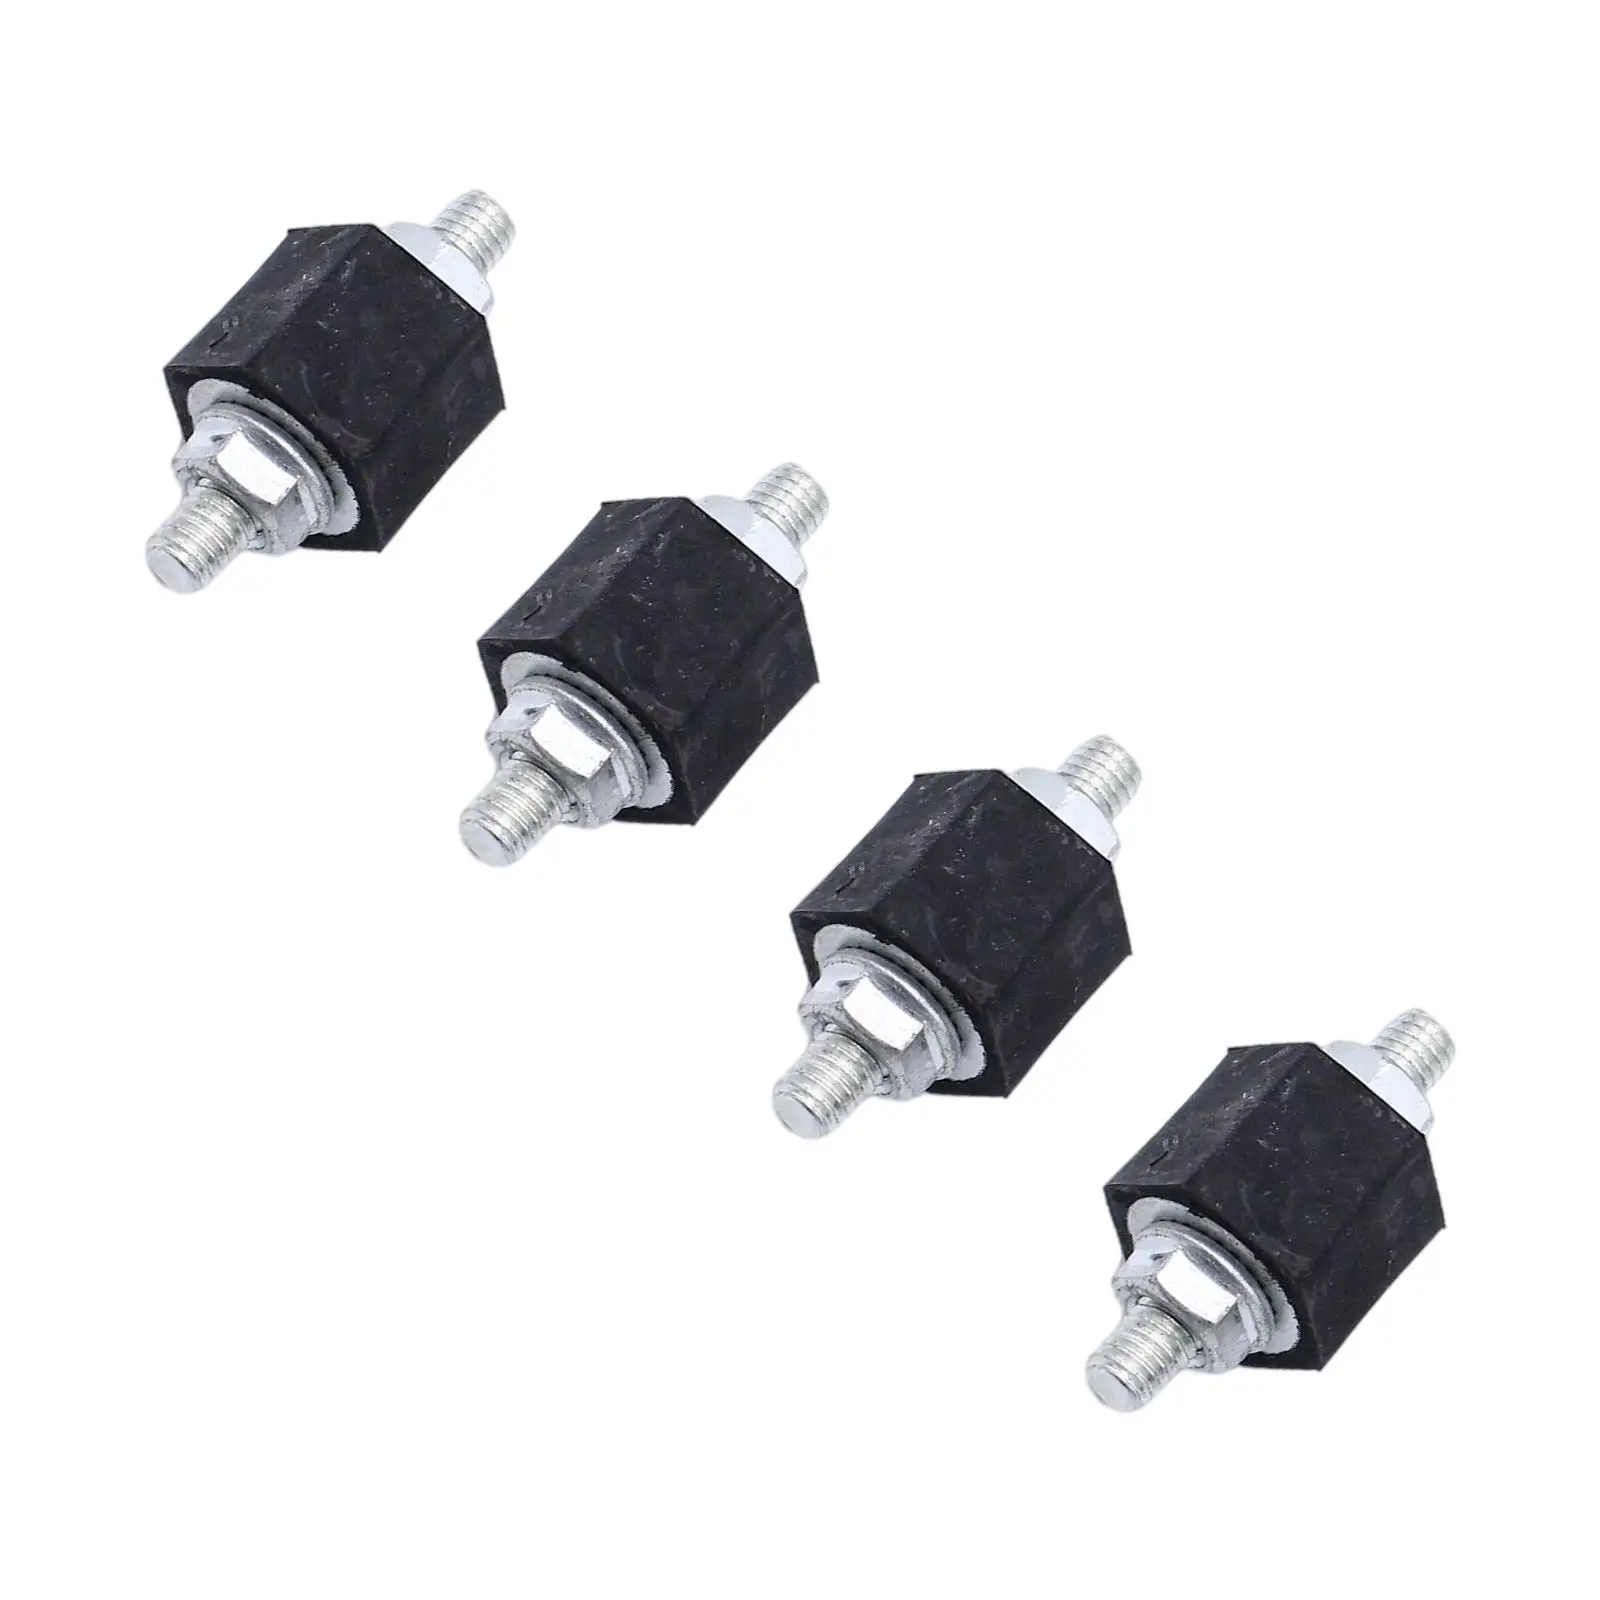 4 Pcs Threaded Rubber Mount 191 201 256 191201256 Safe Driving Accessories